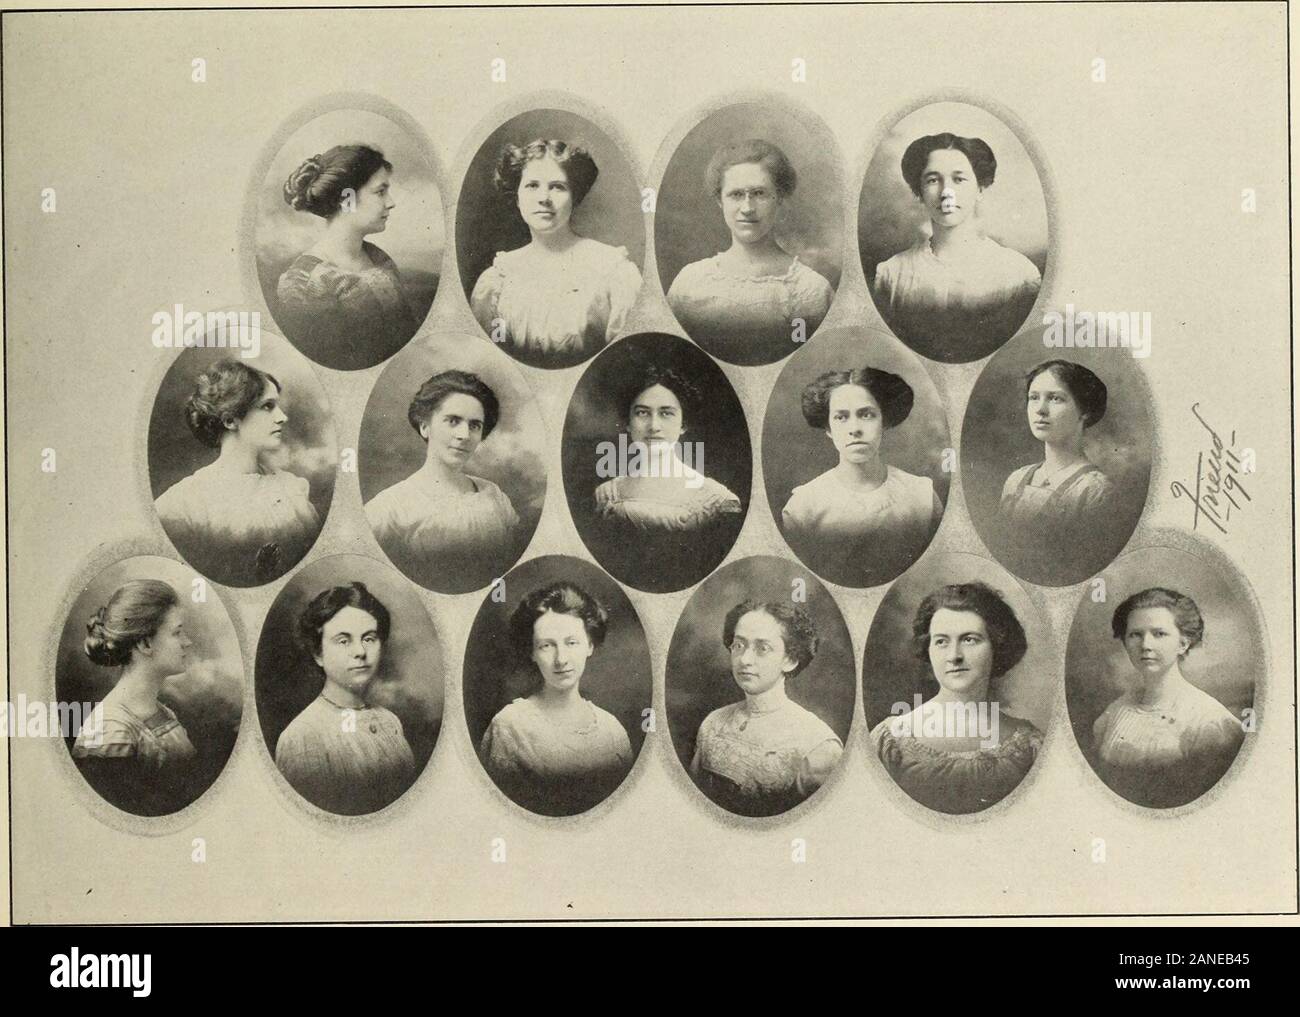 The Monticola . ICIAL DELEGATES Alpha Xi Delta Mabel Weaver Lucas Edith Scott Smith Leda Cordelia Atkeson Kappa Kappa Gamma Susan Louise Smith Margaret Buchanan Genevieve Stealey Chi Omega Clara Elizabeth Dickason Nellie Bassel Grumbein Esther Jean Gilmore L52 ^2Vlfl)a XiT&gt;elta Founded at Lombard College, Galesburg, Illinois, April 17, 1893 COLORS Light Blue, Dark Blue and Old Gold FLOWER Pink Rose 153 Dota Chapter Established May 8, 1905 Patronesses Mrs. Charles Edgar HoggMrs. Robert Bruce BrinsmadeMrs. Thomas Clark AtkesonMrs. William J. Leonard Sorores in Urbe Mrs. Helen Smith Mrs. Mabel Stock Photo